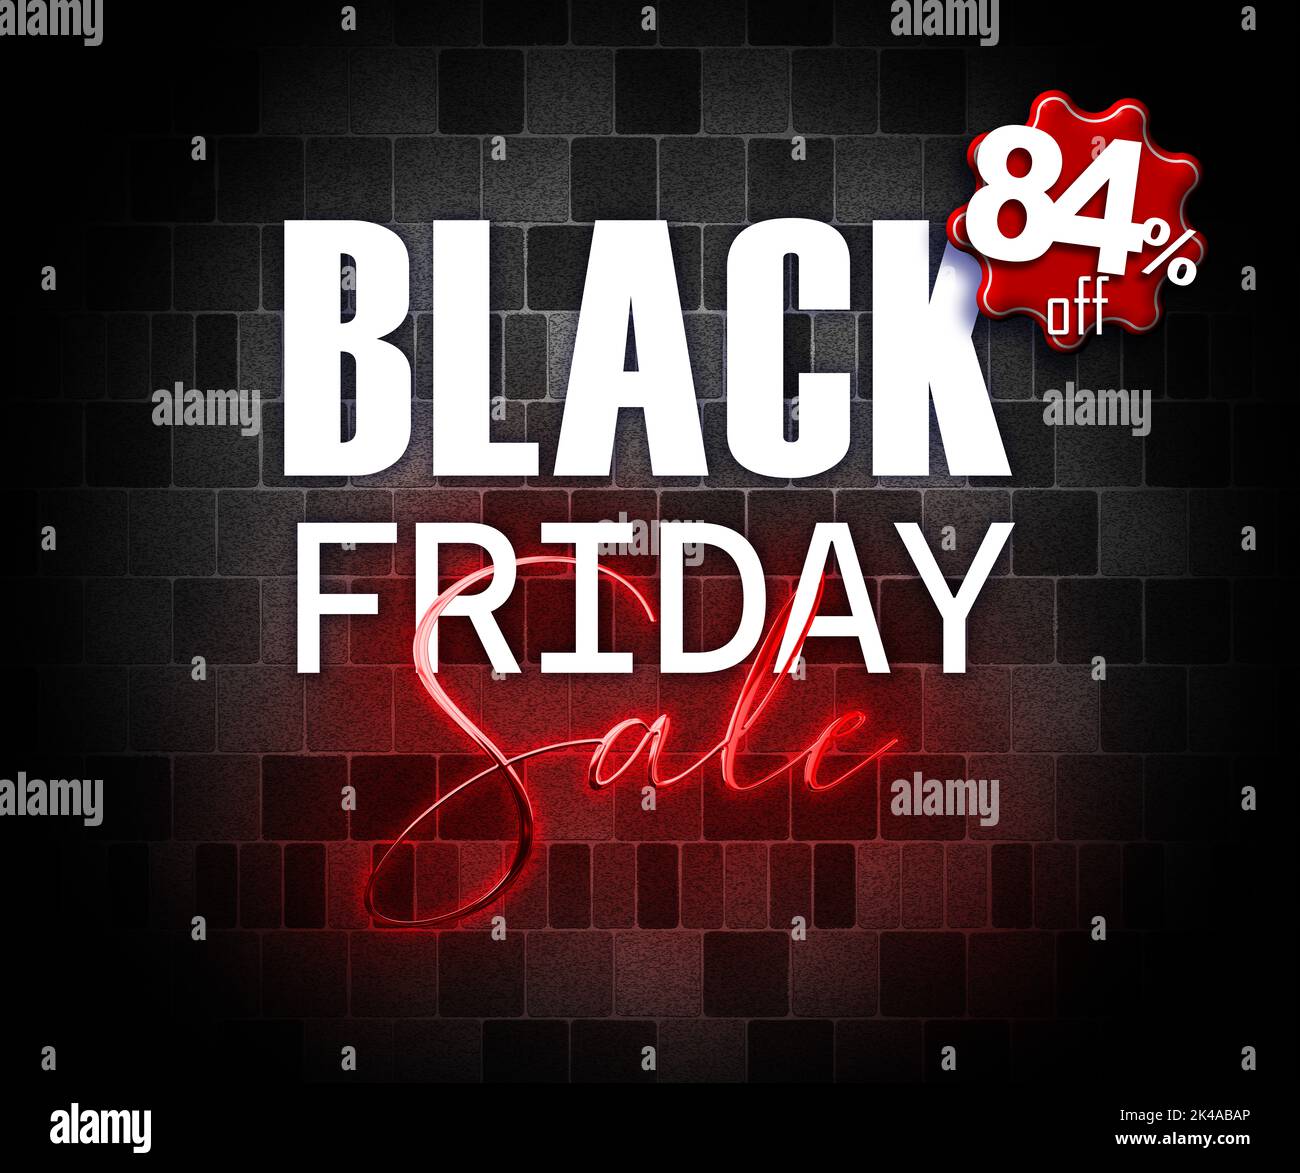 illustration with 3d elements black friday promotion banner 84 percent off sales increase Stock Photo